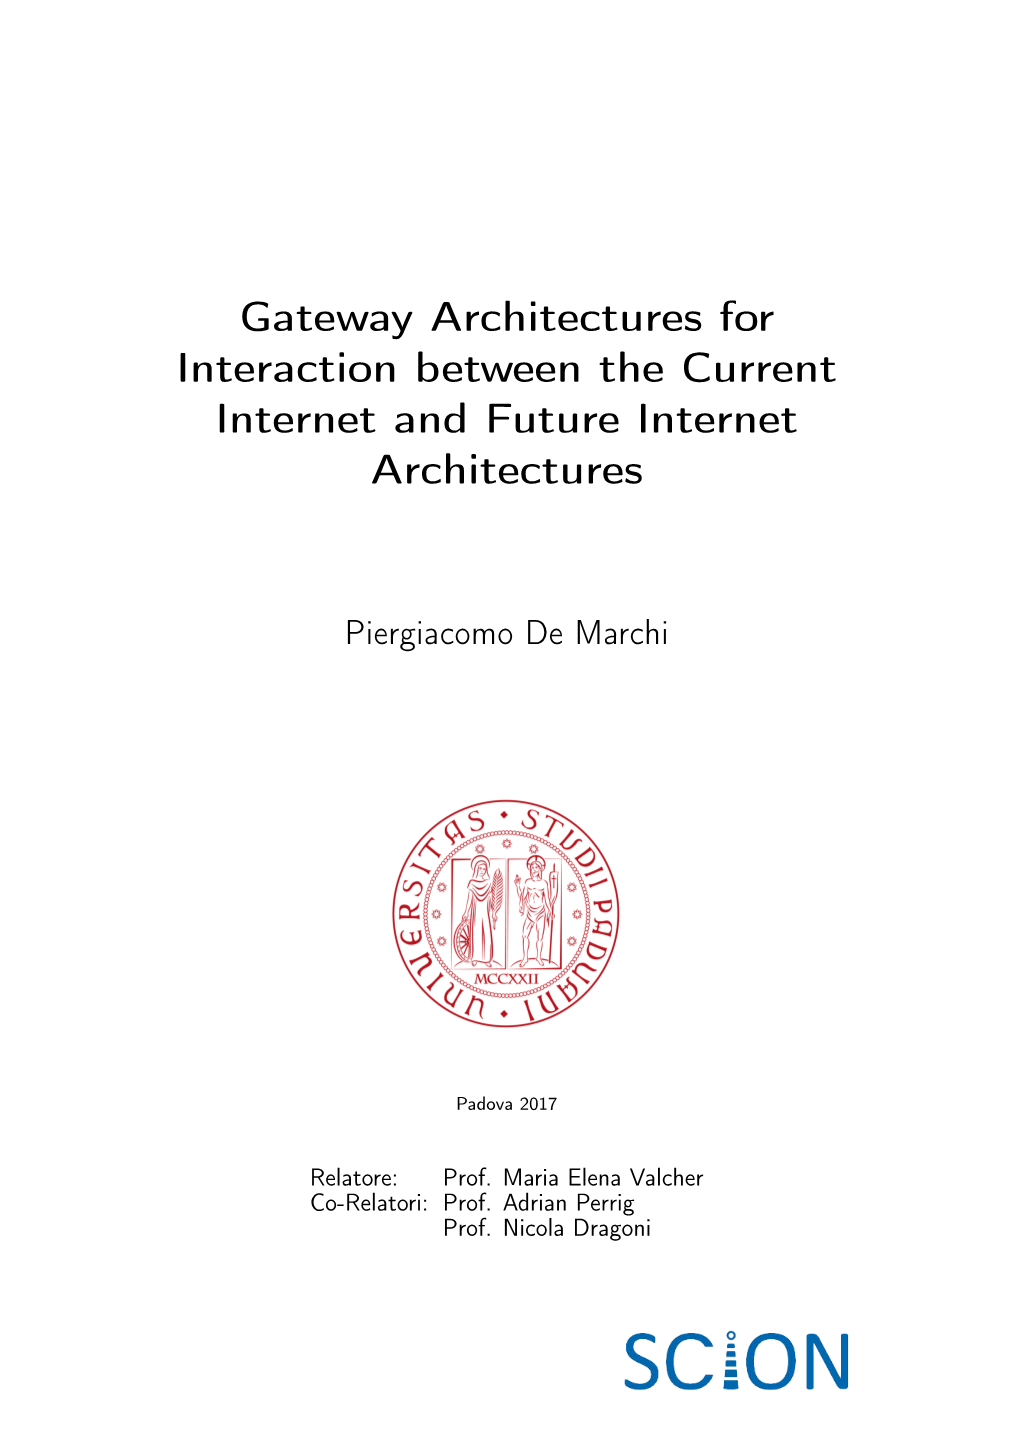 Gateway Architectures for Interaction Between the Current Internet and Future Internet Architectures